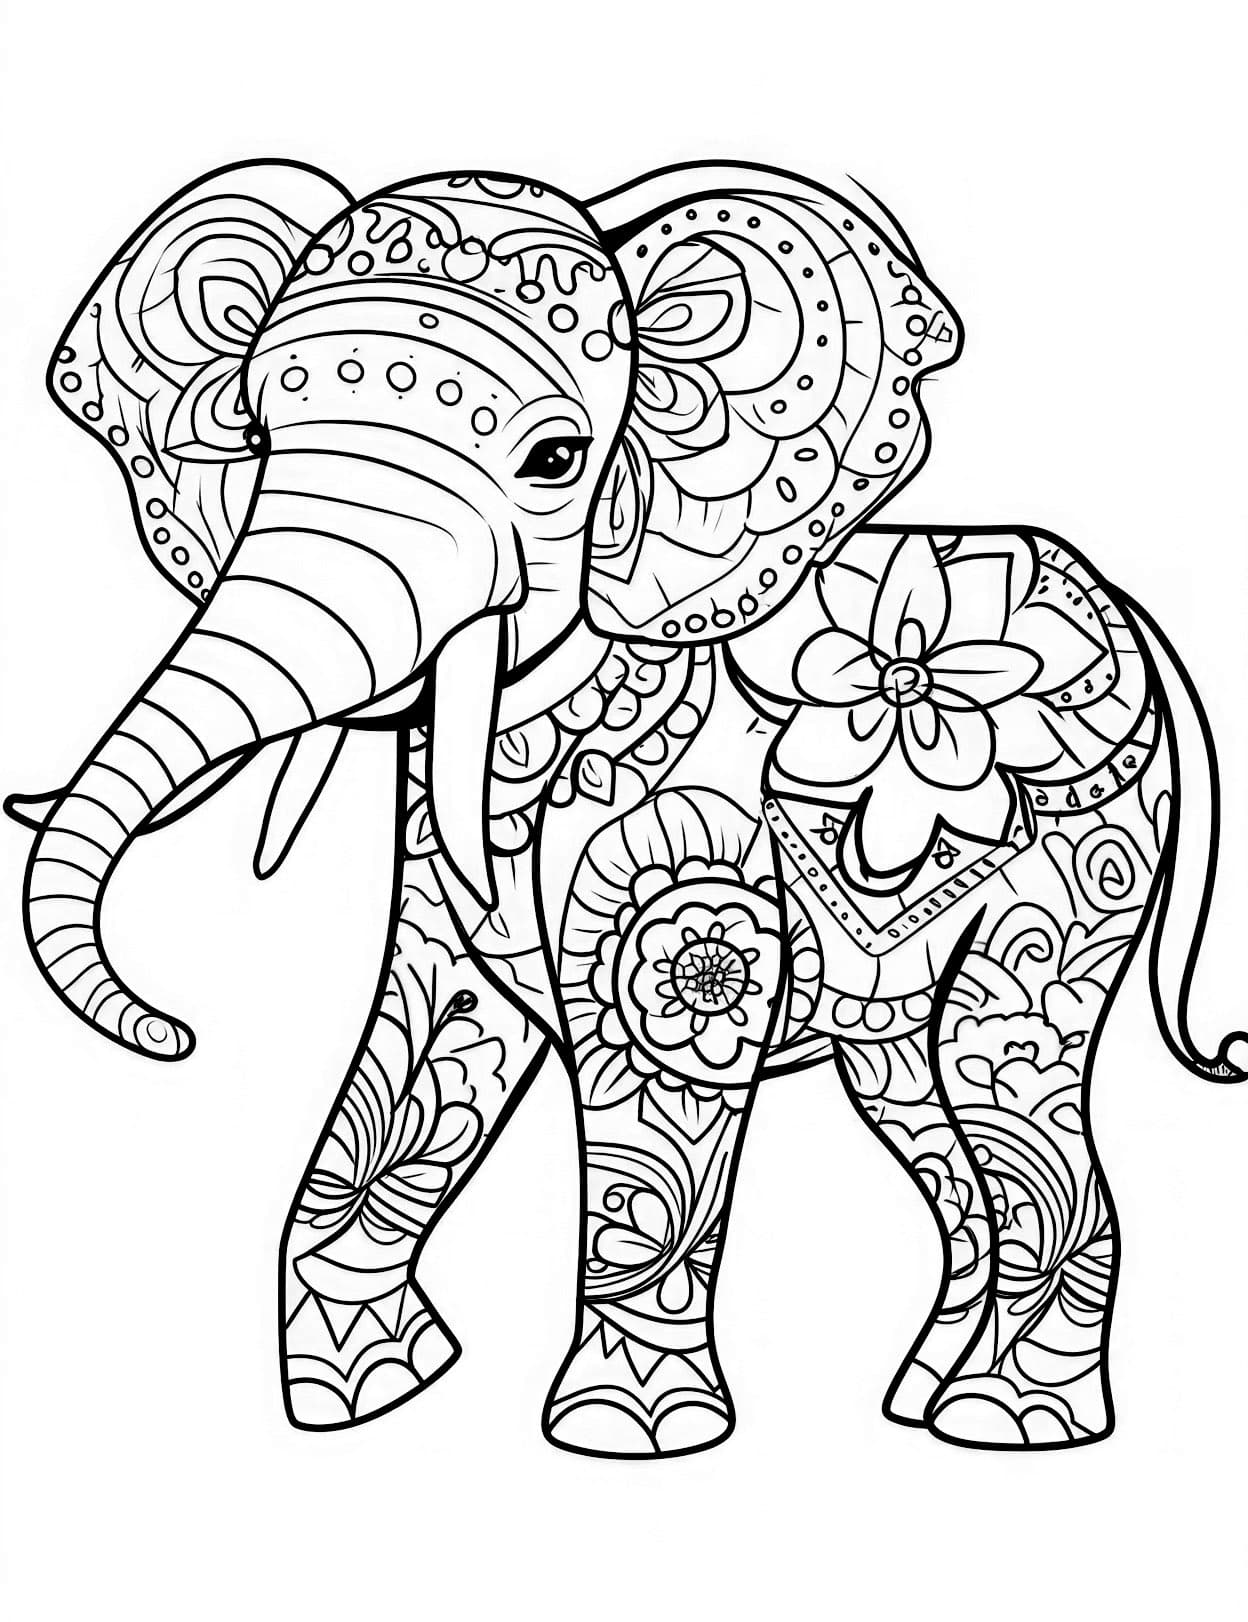 Majestic elephant coloring pages for adults and kids